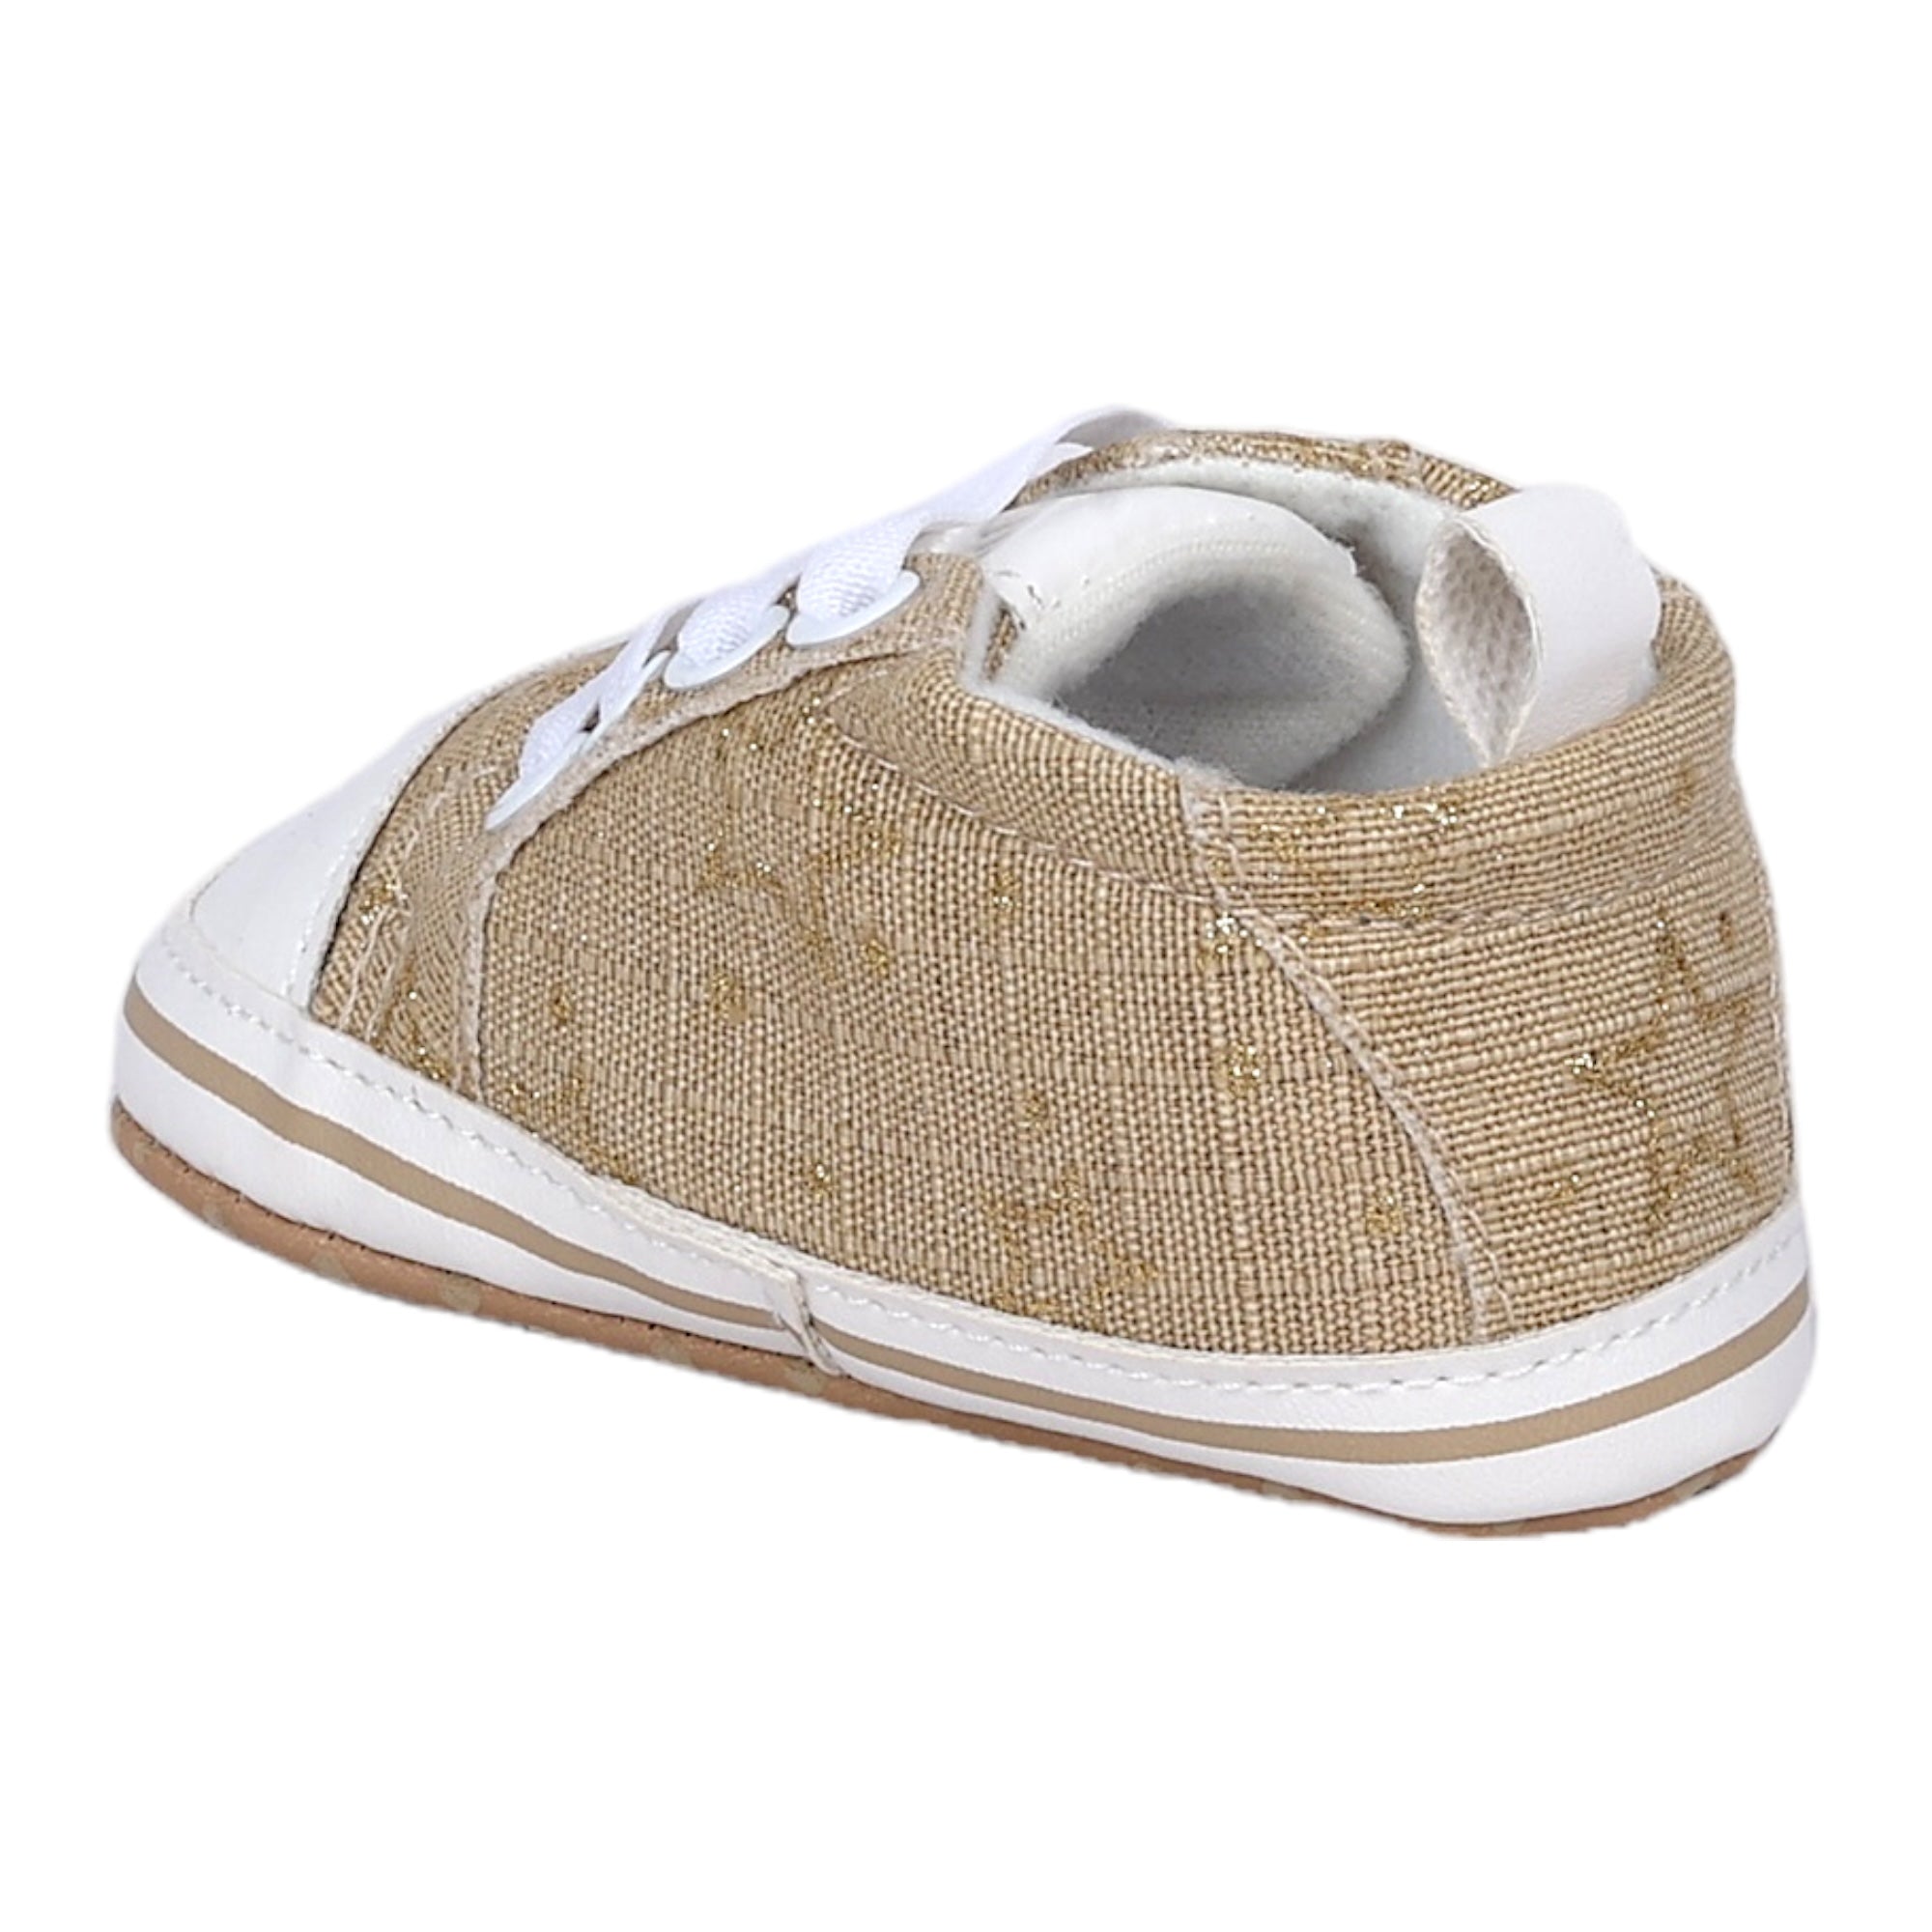 Baby Moo Lace-Up Design Anti-Skid Jute Sneakers - Beige, White